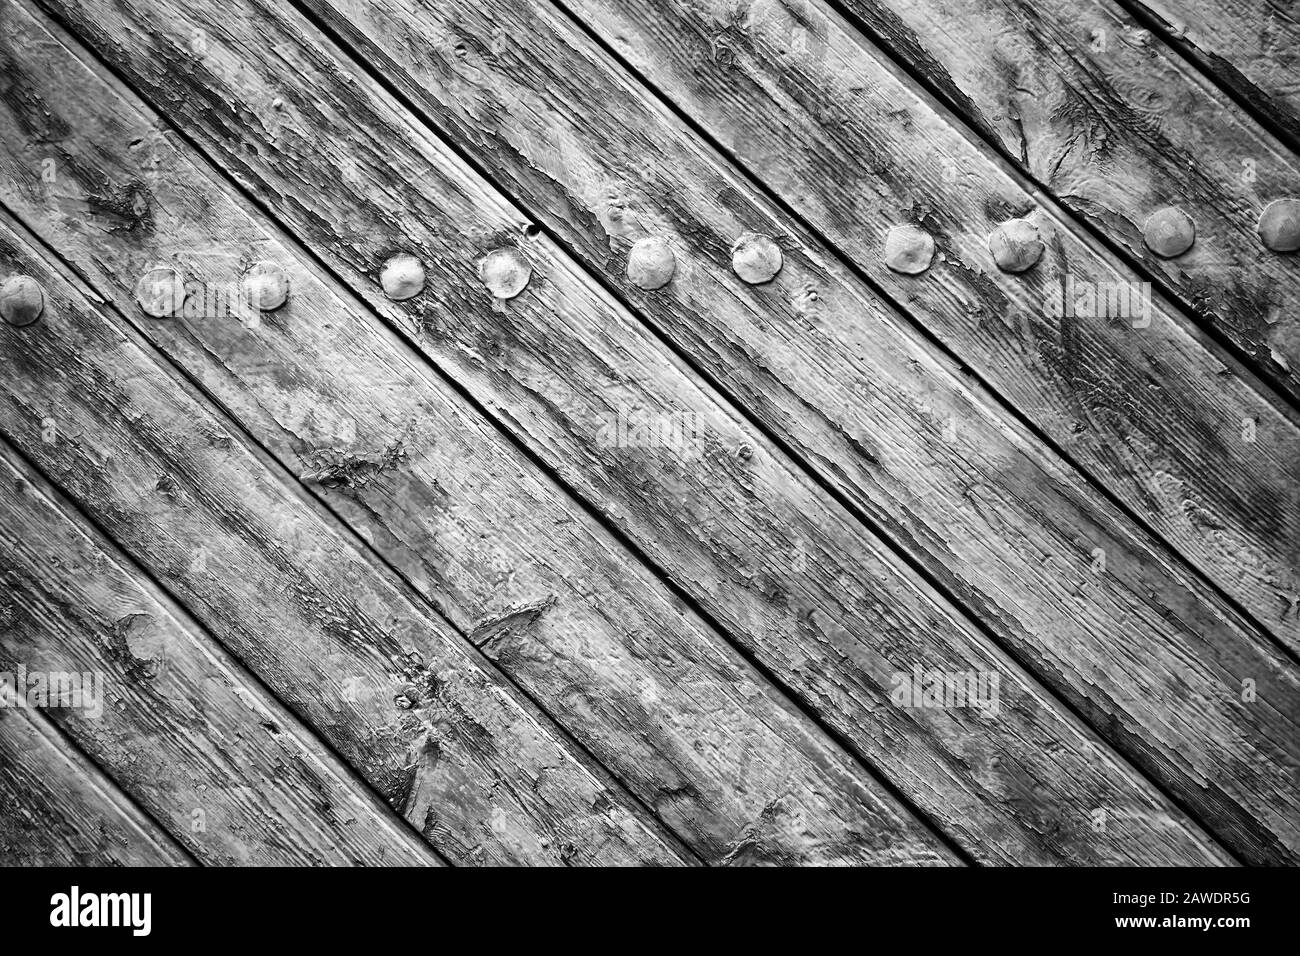 Wood texture on wall, backgrounds and construction Stock Photo